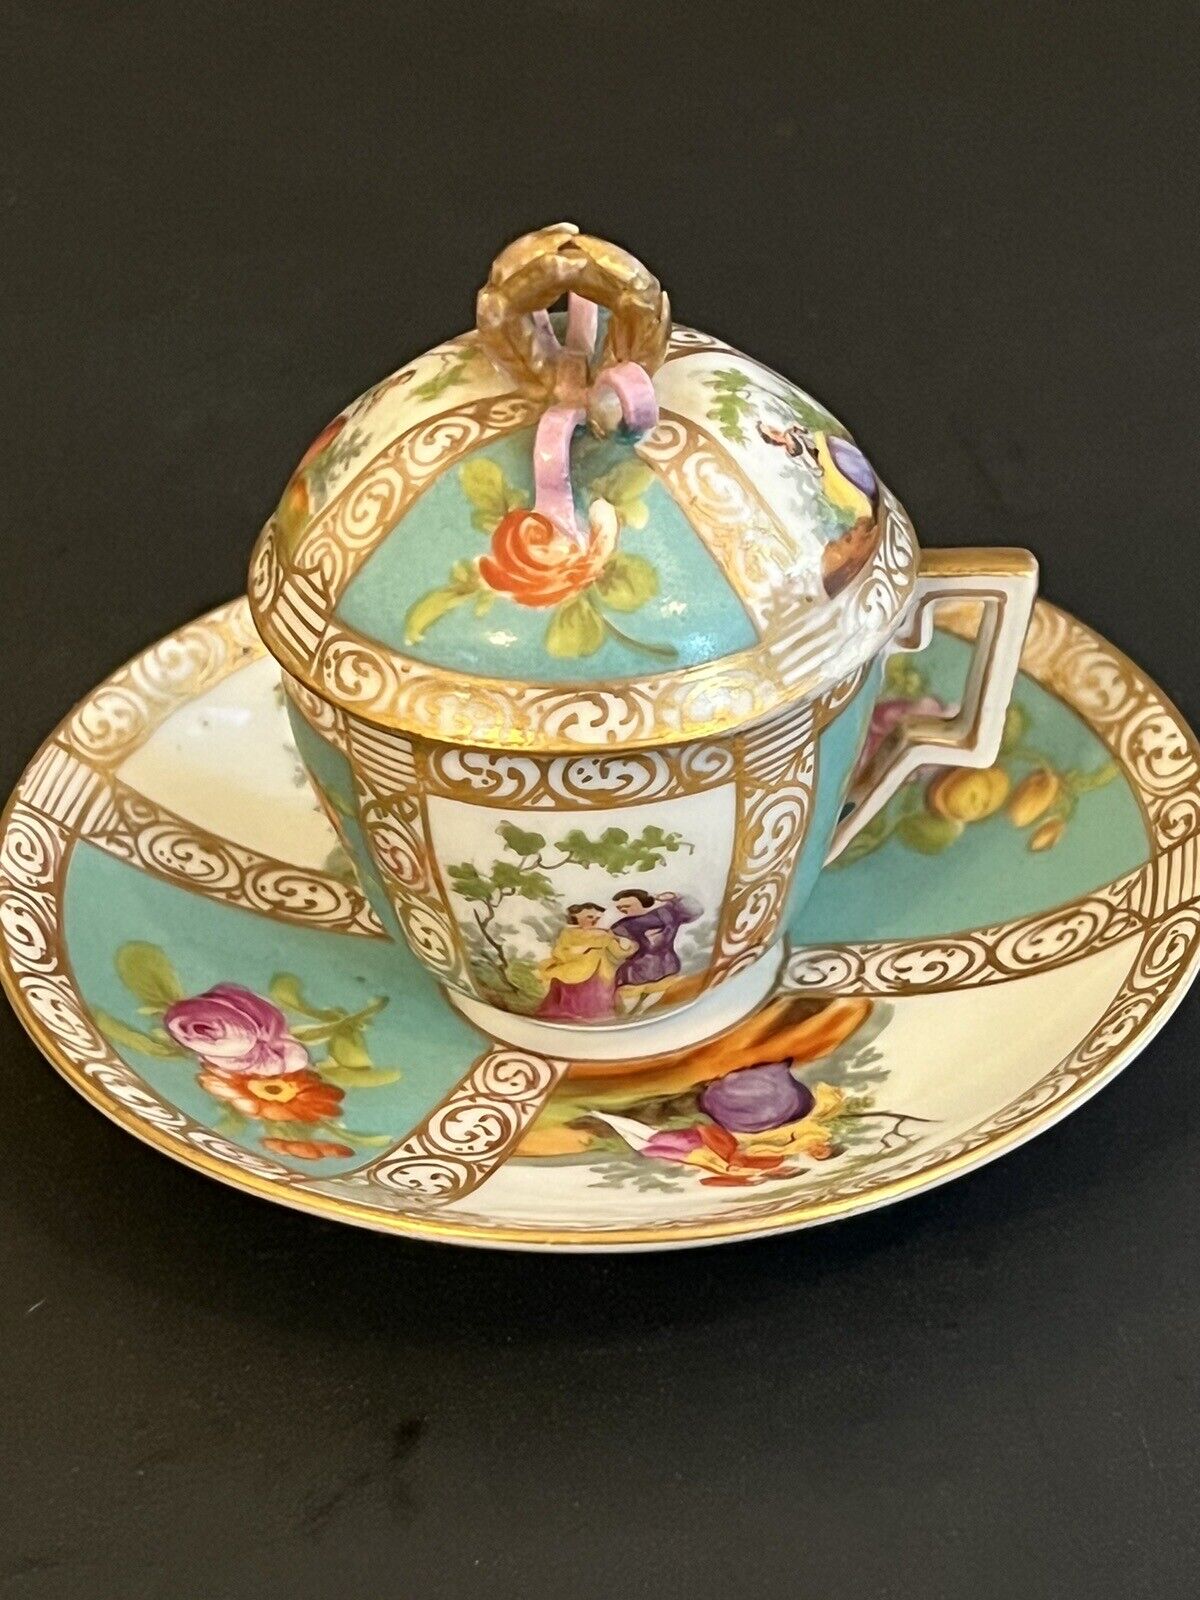 Antique Small Covered Teacup And Saucer Dresden Handpainted Quatrifoil Lid